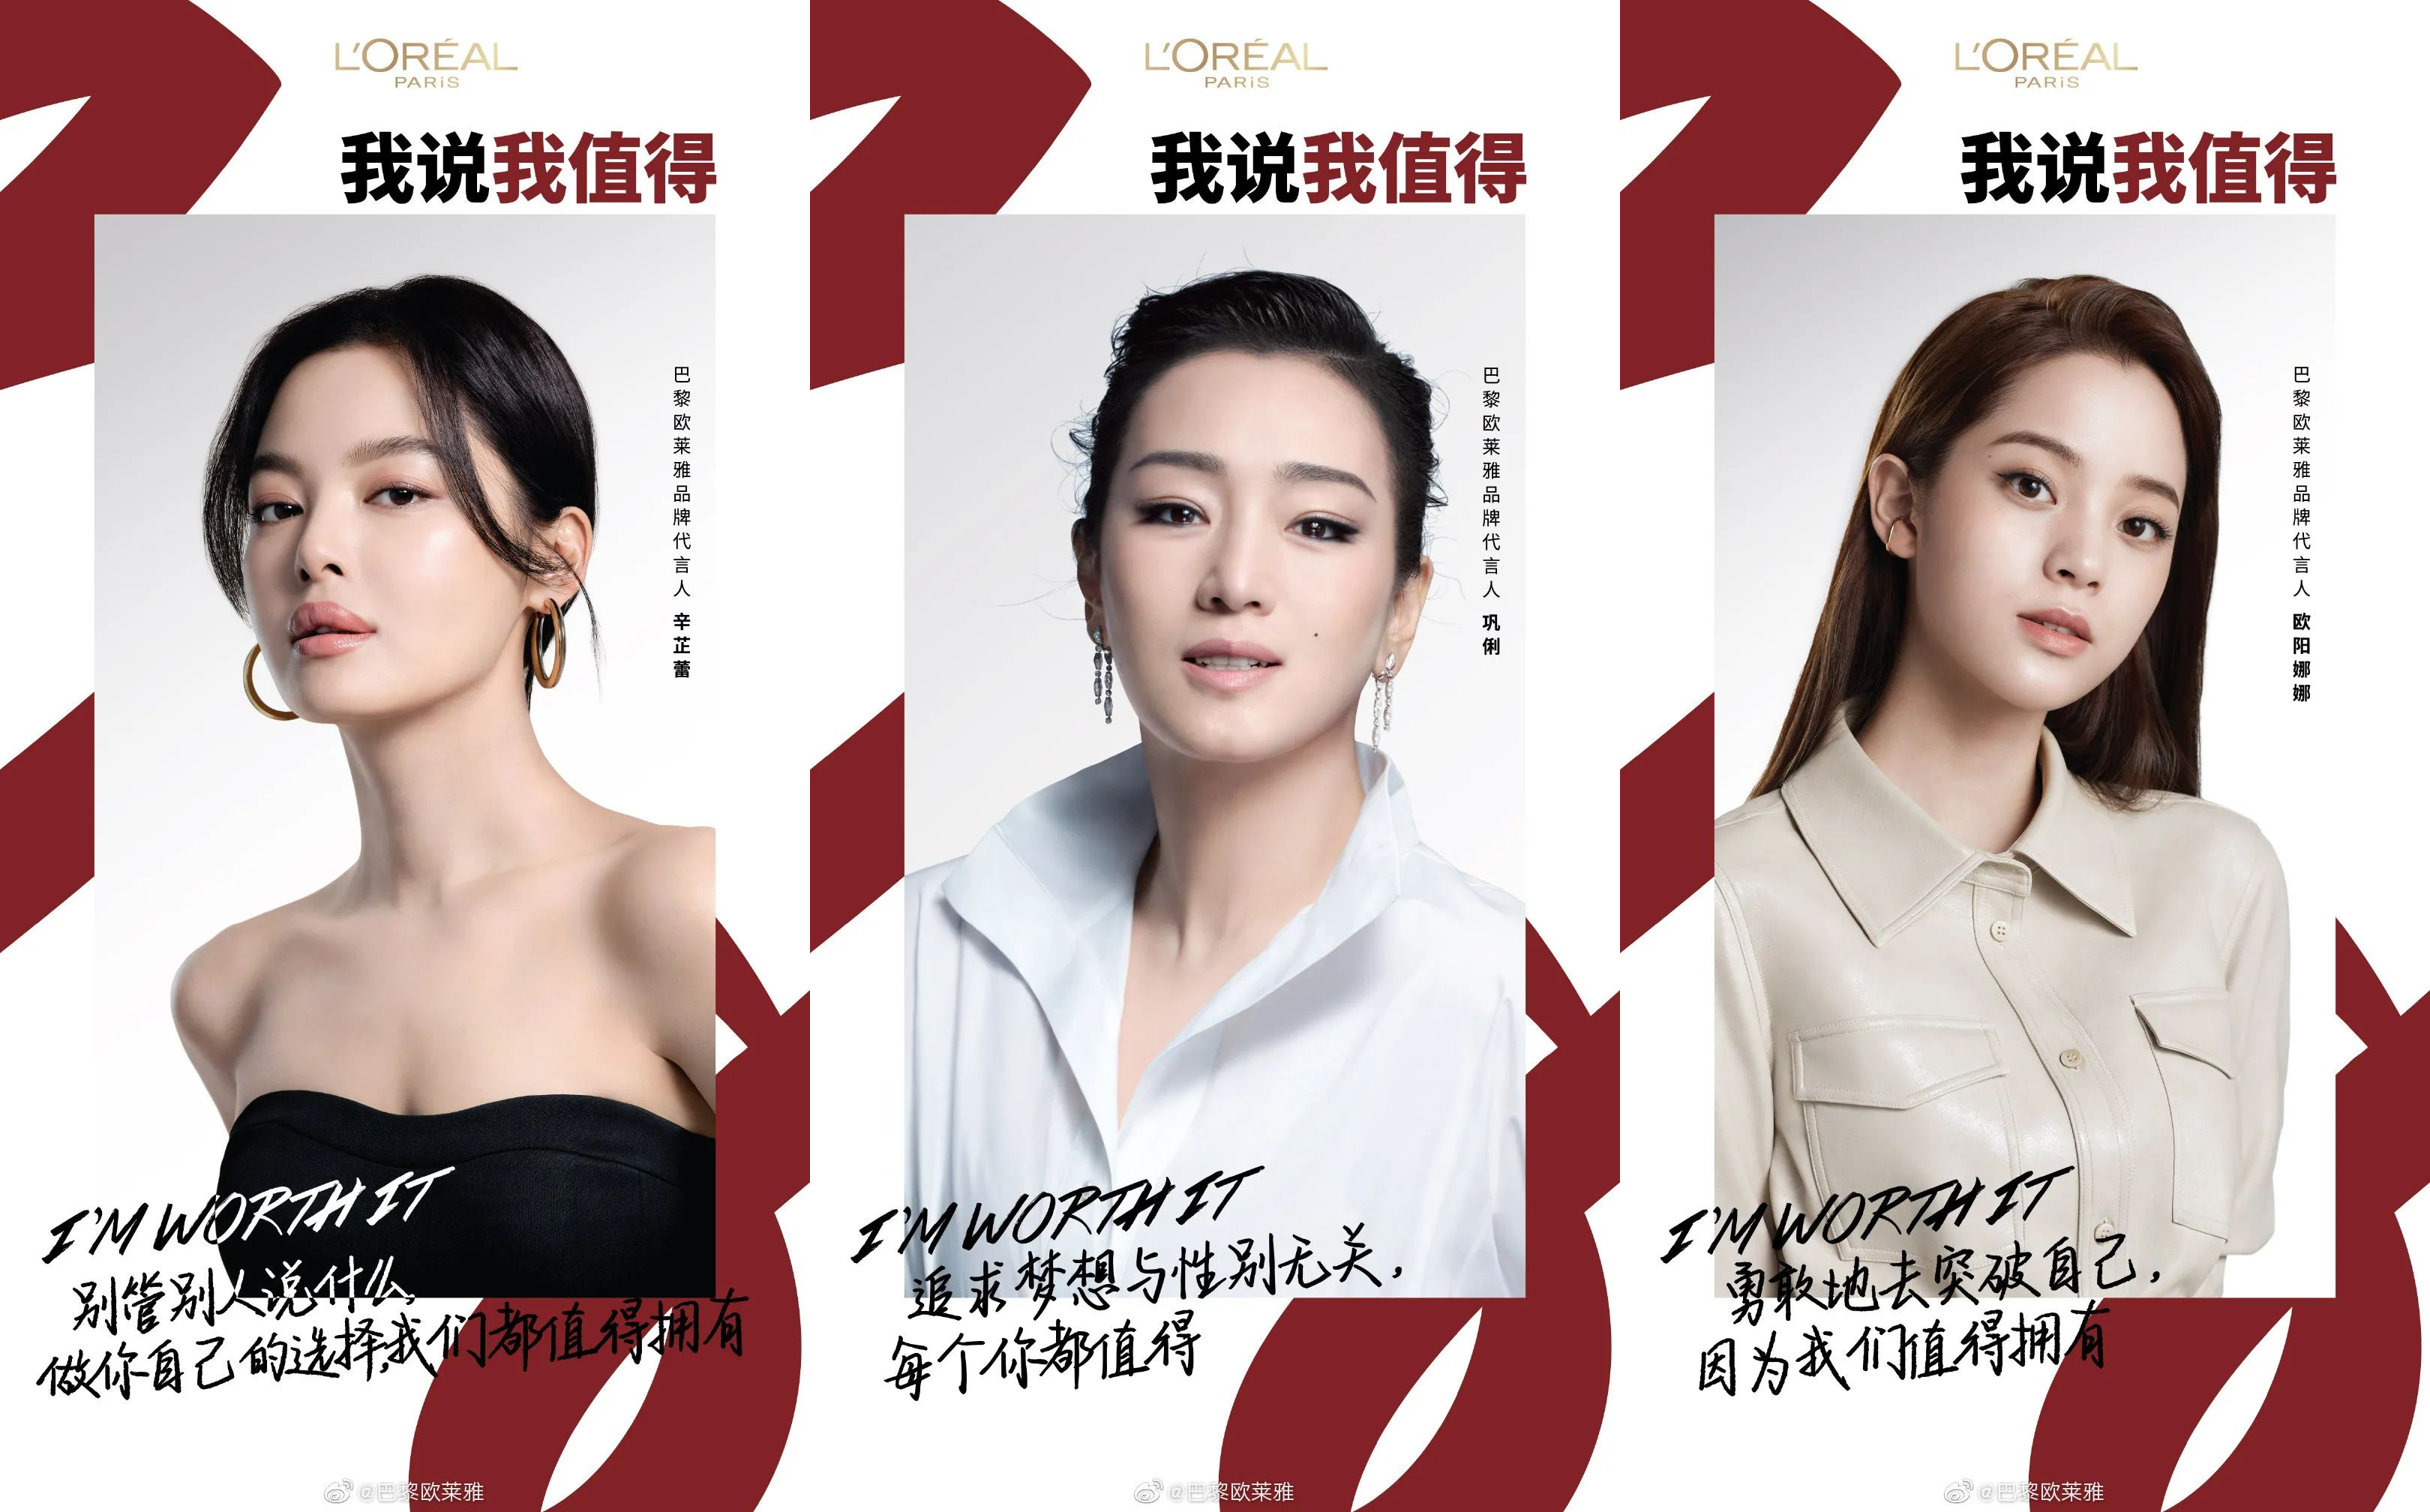 It Takes Boldness to be Nude' says Campaign in China From L'Oréal